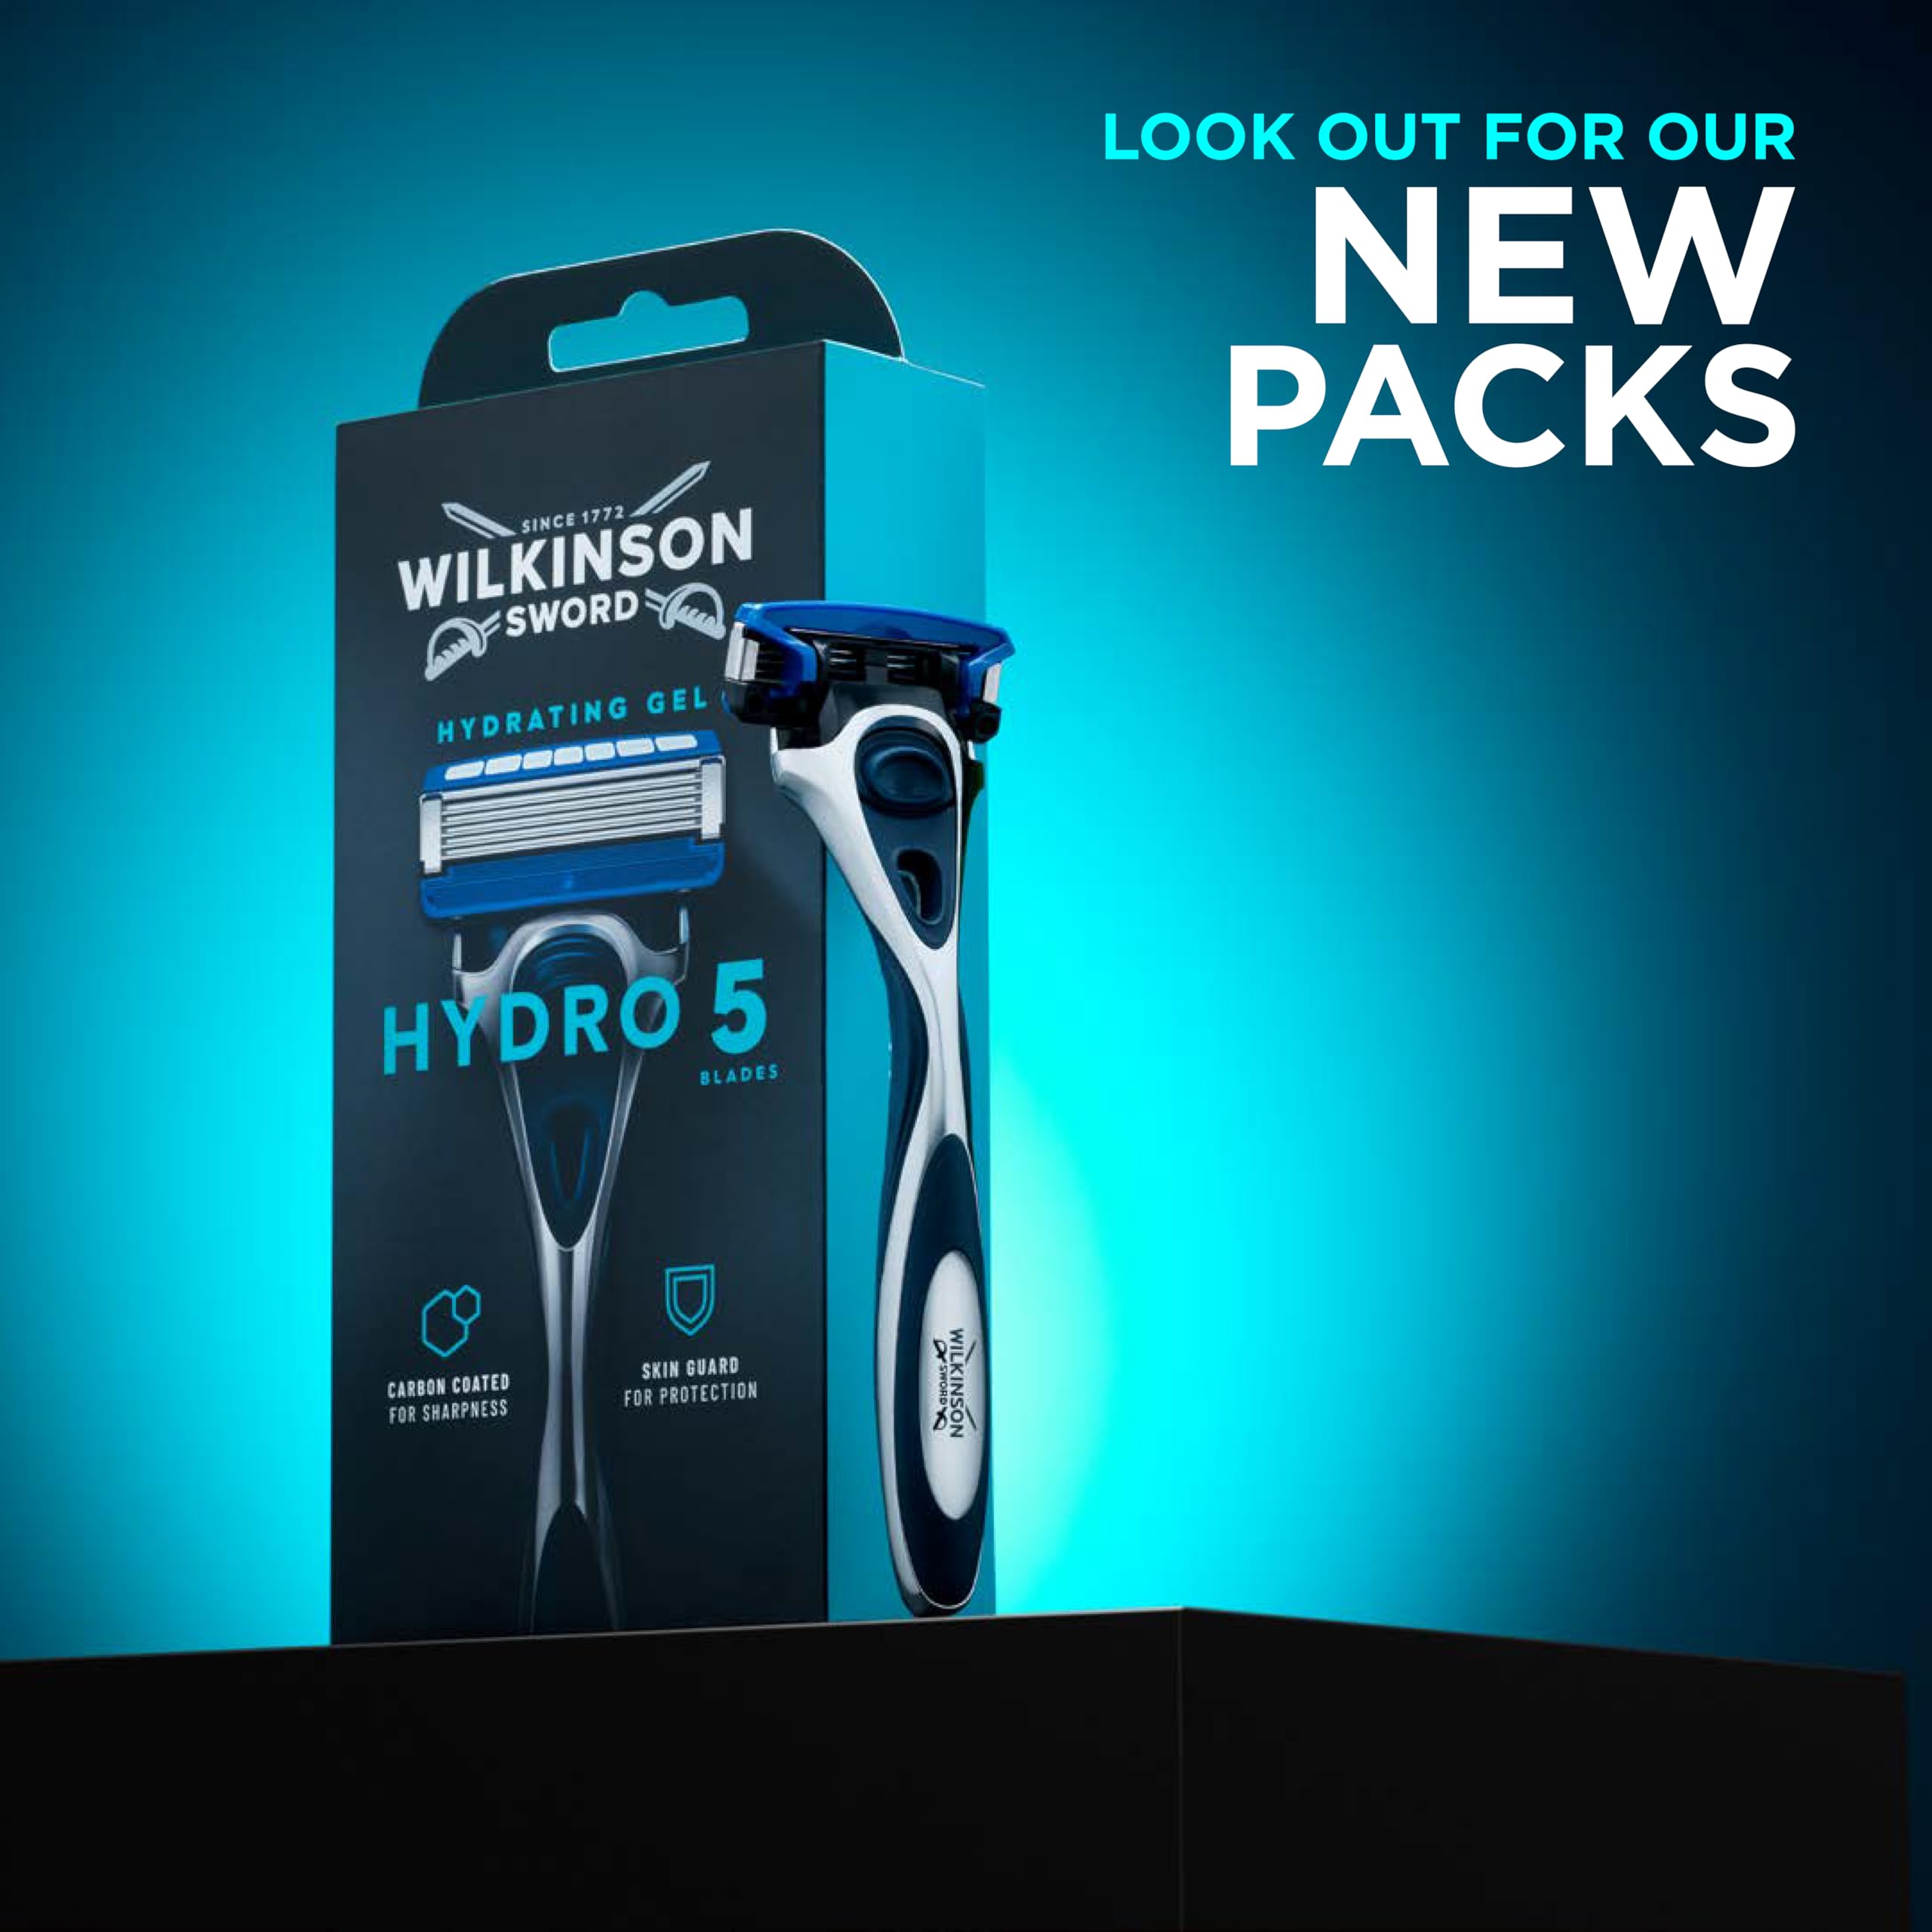 WILKINSON SWORD - Hydro 5 Skin Protection For Men | Hydrating Gel and Precision Trimmer | Pack of 12 Razor Blade Refills